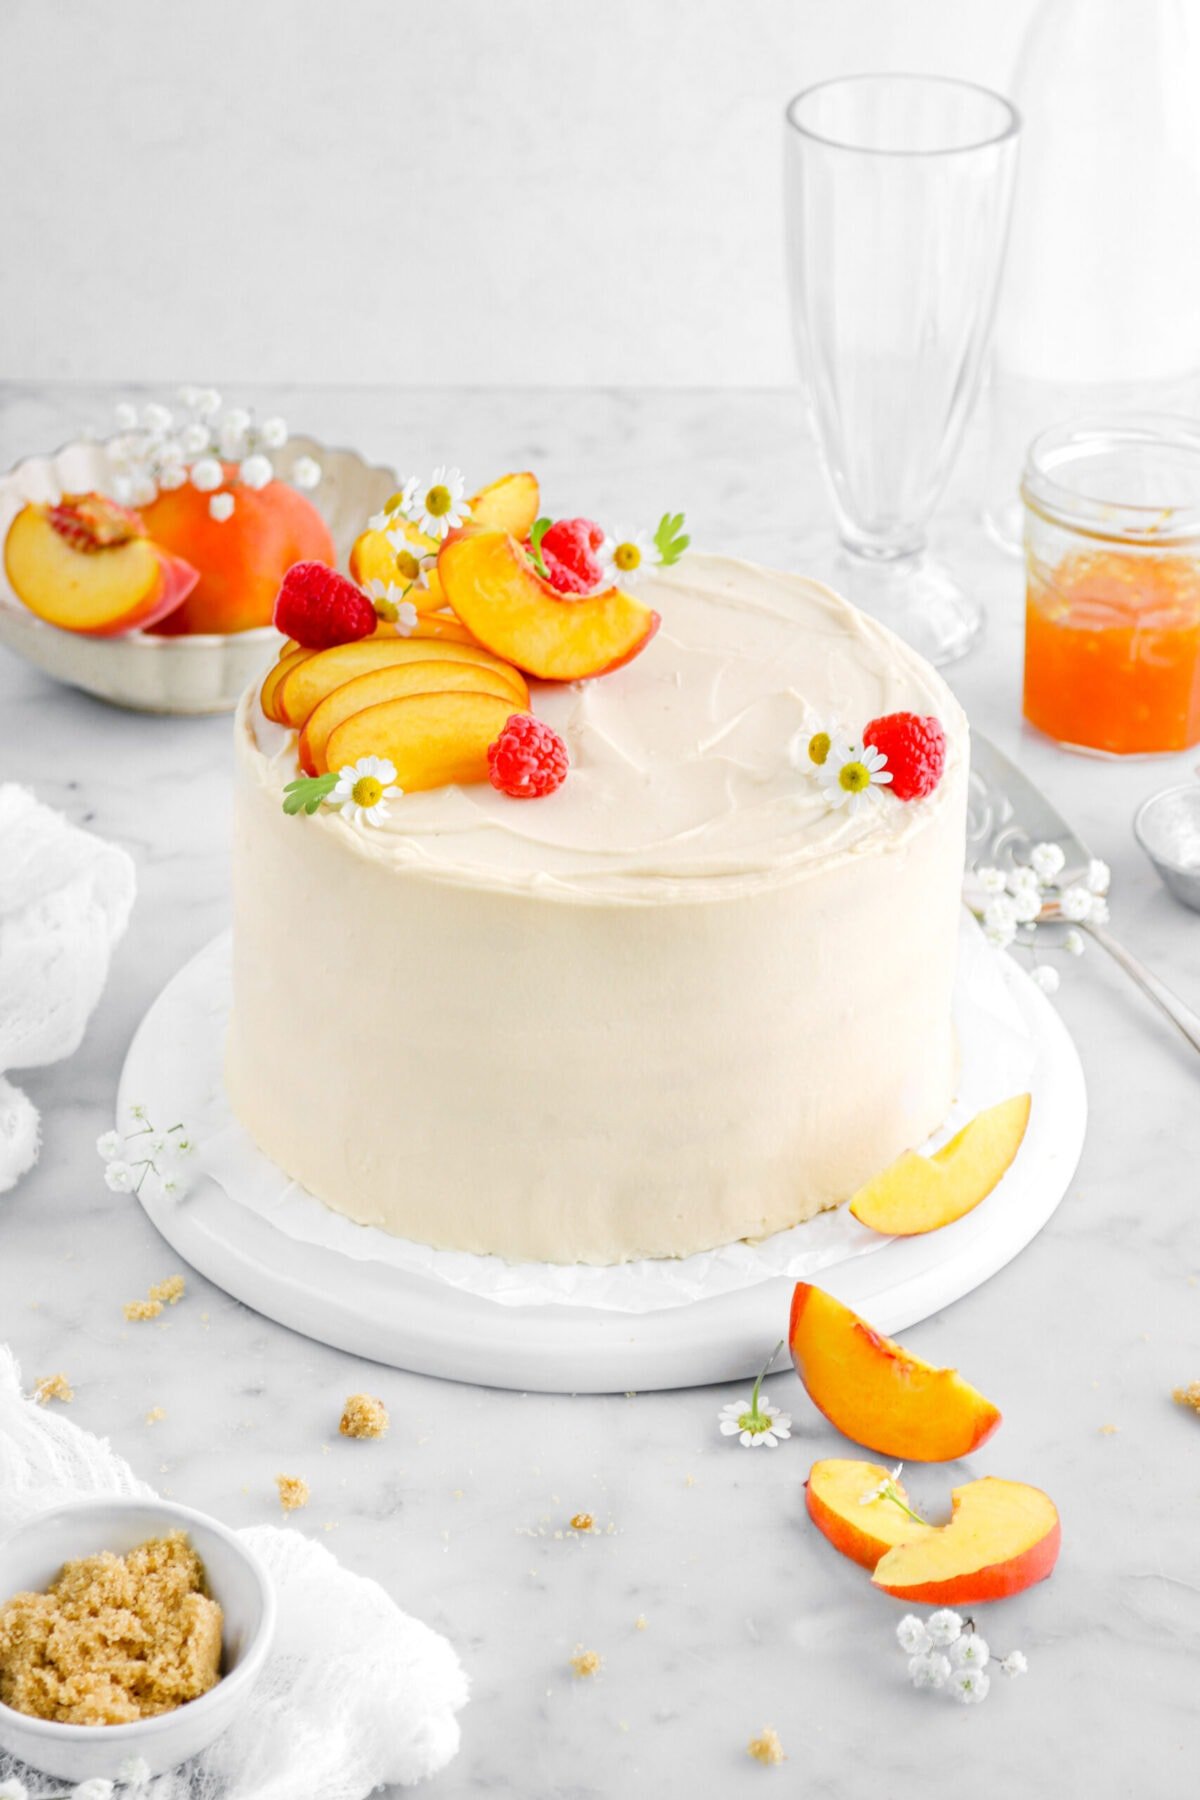 angled close up of peach cake with peach slices, raspberries, and white chamomile flowers on top, with brown sugar and more peach slices around on marble surface.